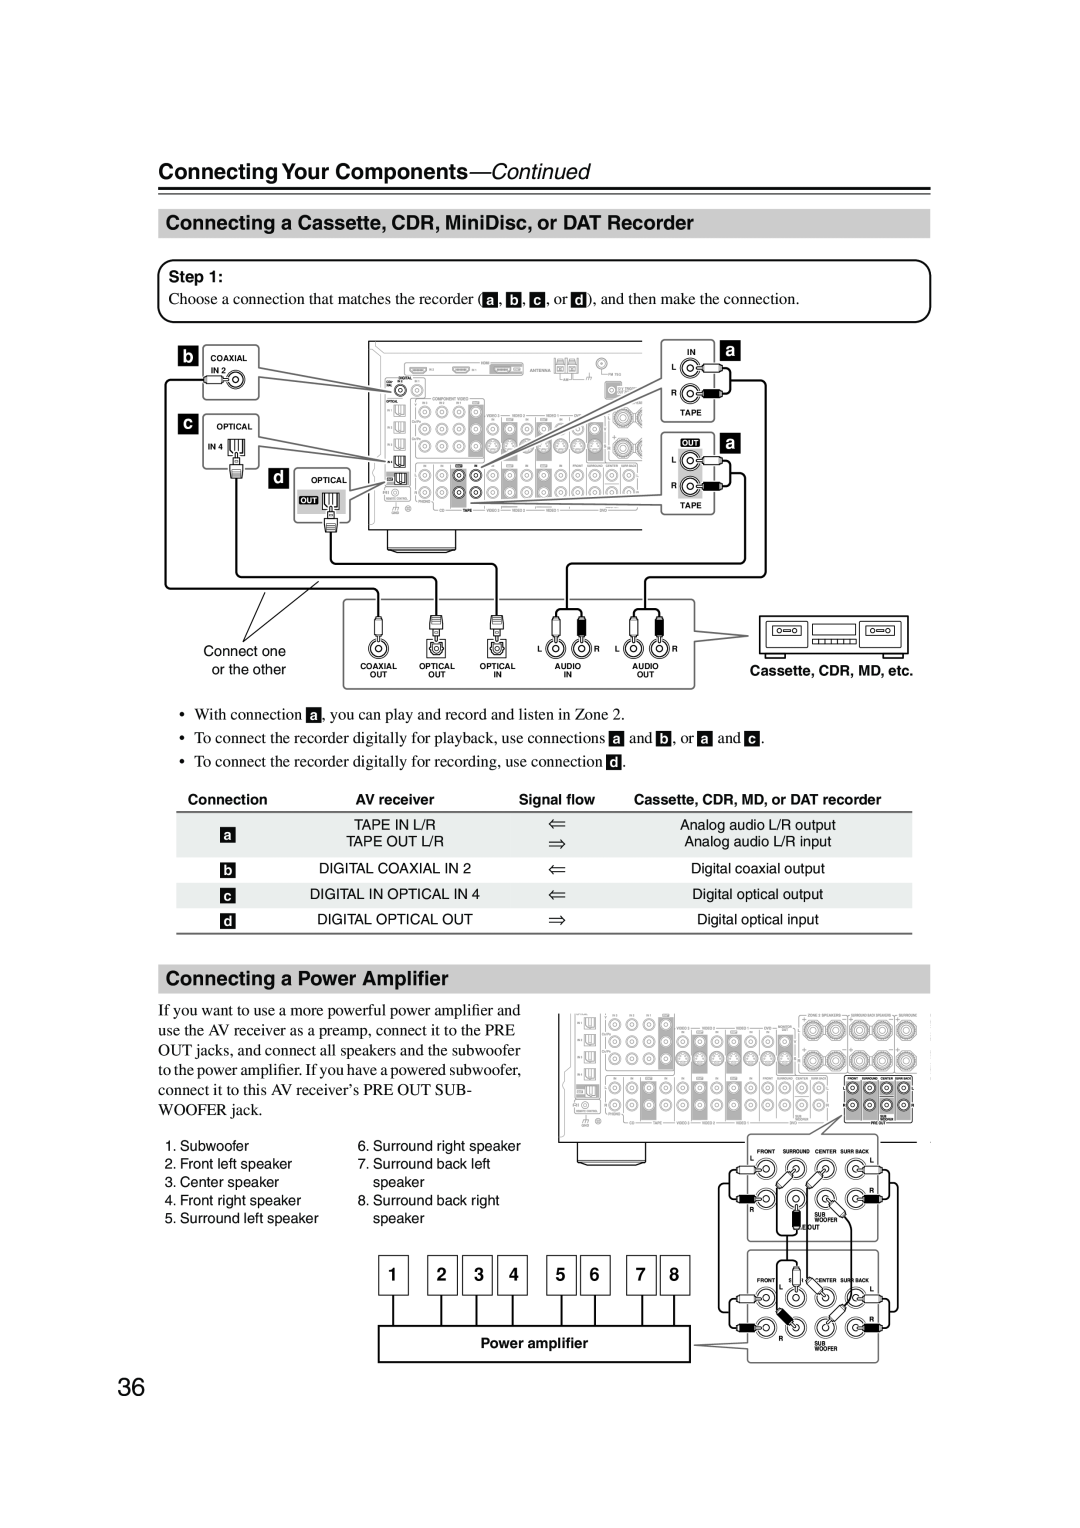 Onkyo SR804 instruction manual Connecting a Power Ampliﬁer, Connecting Your Components—Continued 